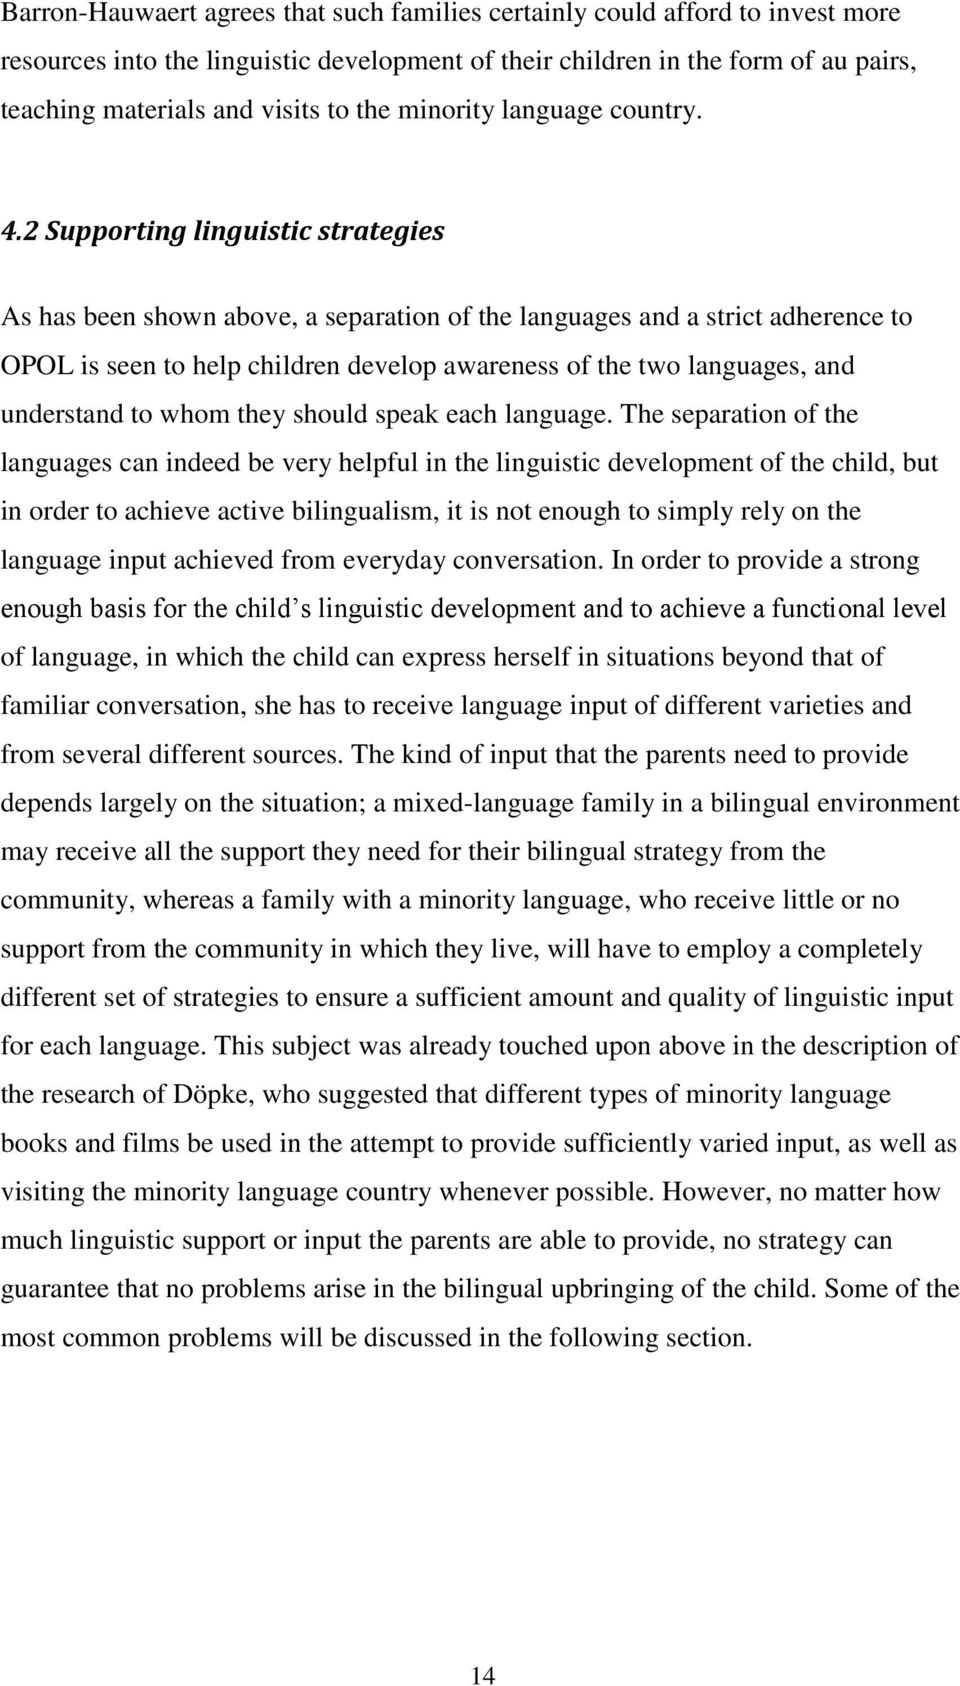 2 Supporting linguistic strategies As has been shown above, a separation of the languages and a strict adherence to OPOL is seen to help children develop awareness of the two languages, and